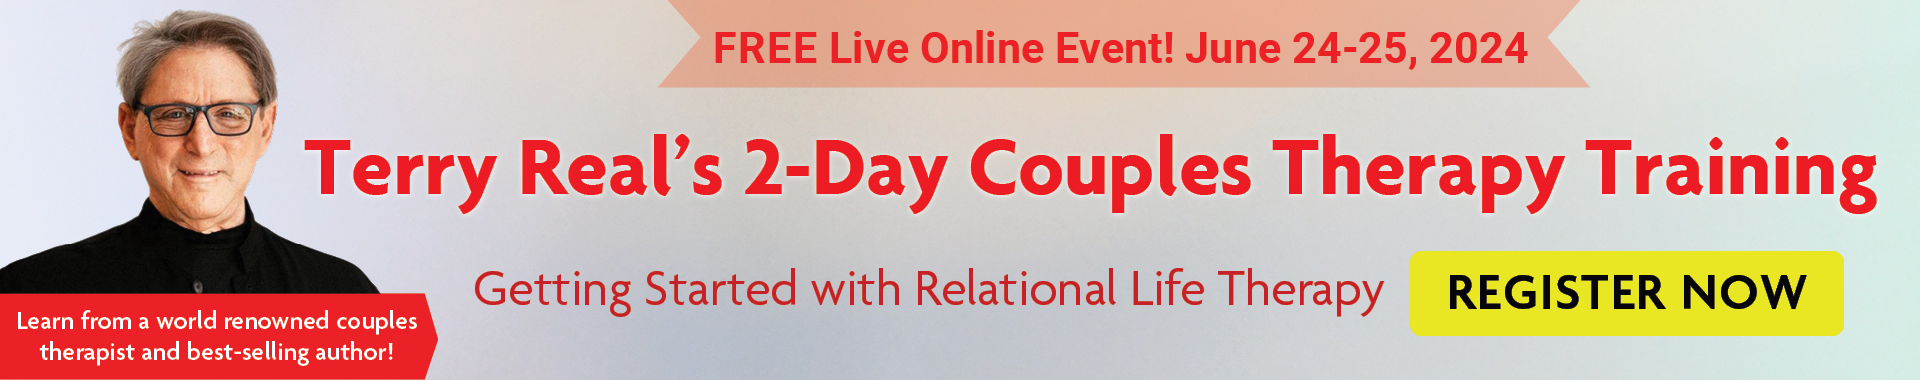 Terry Real's 2-Day Couples Therapy Training: Getting Started with Relational Life Therapy